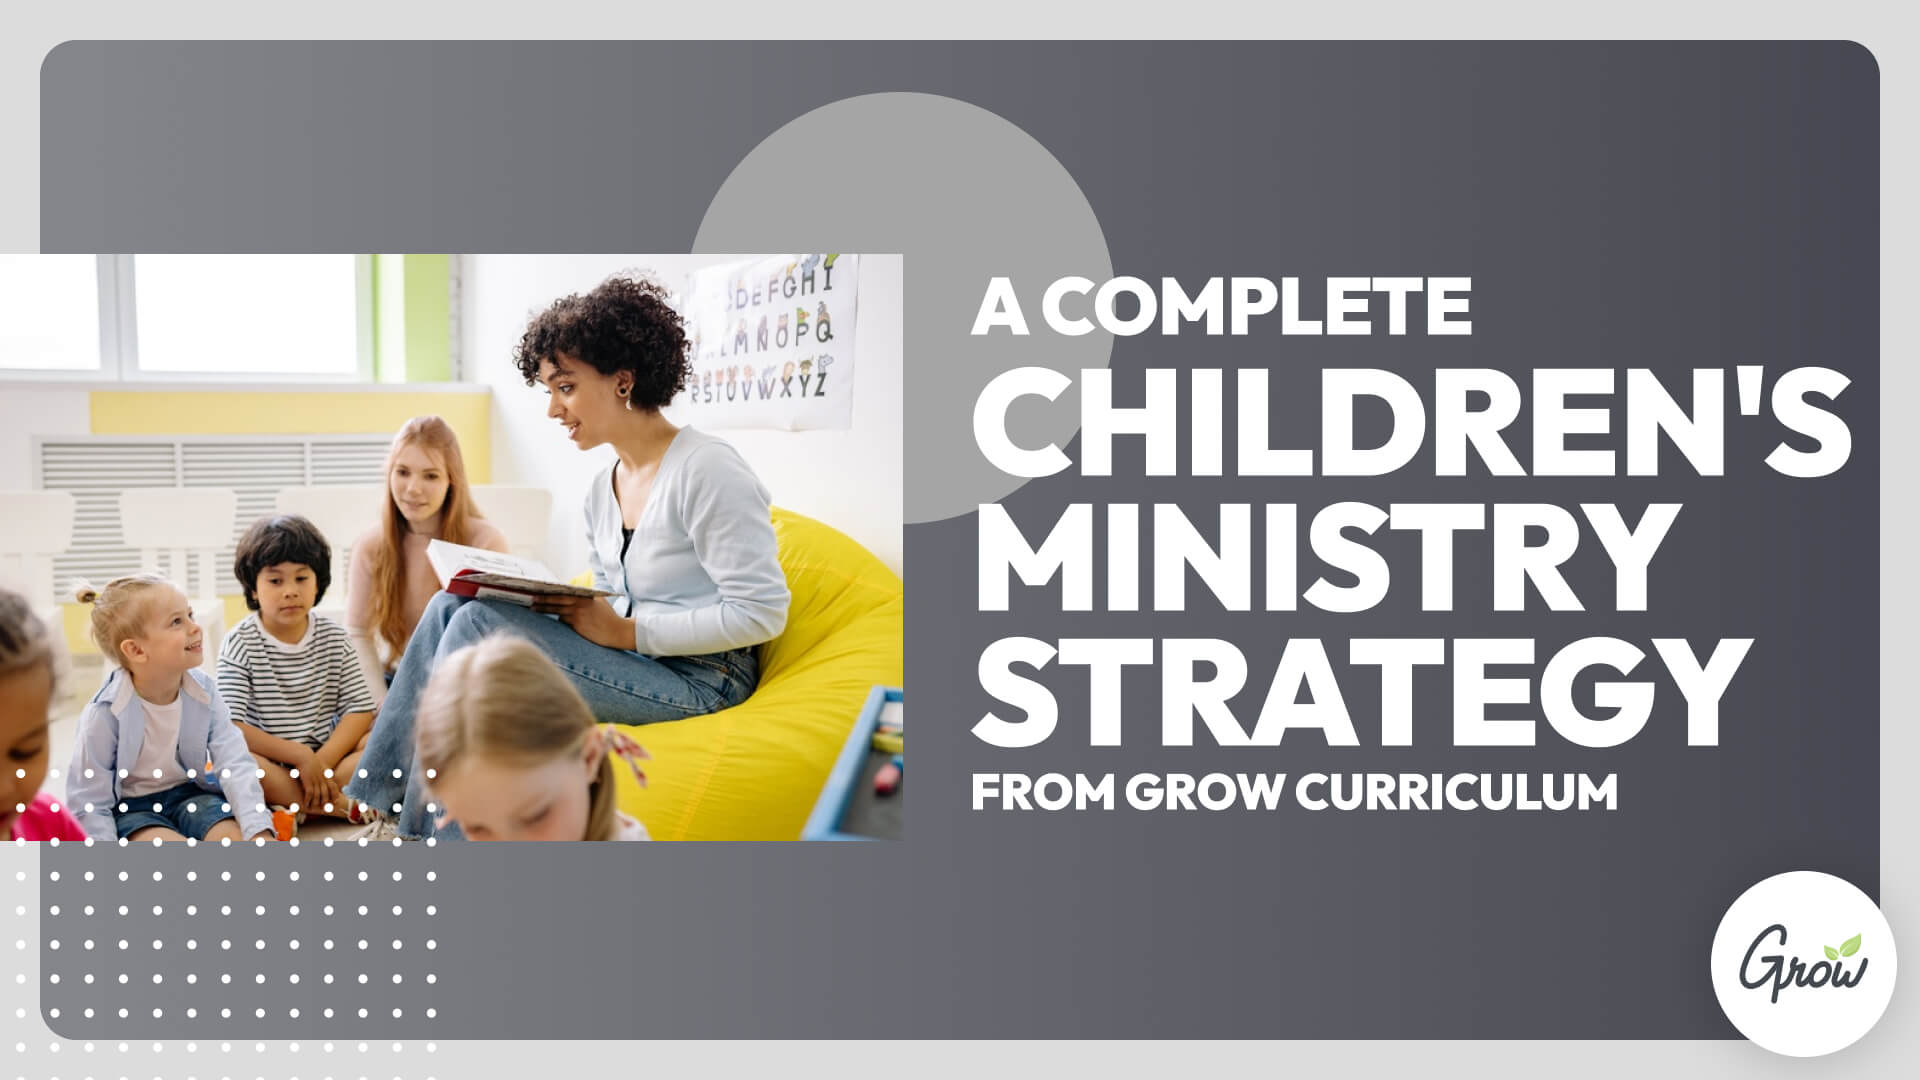 A Complete Children's Ministry Strategy from Grow Curriculum